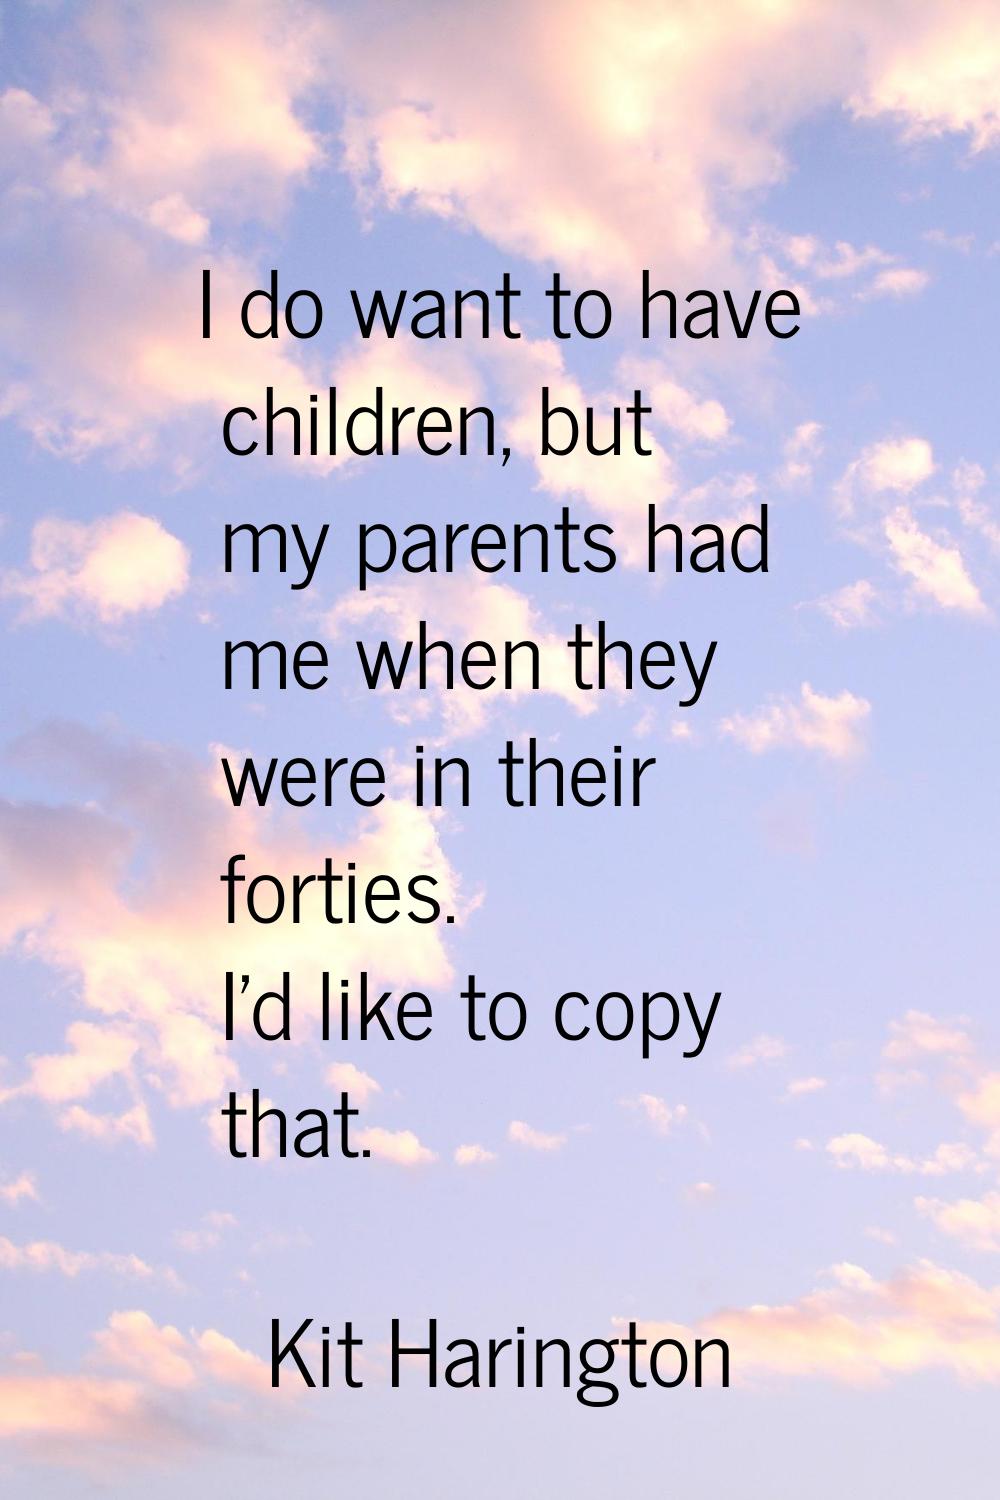 I do want to have children, but my parents had me when they were in their forties. I'd like to copy